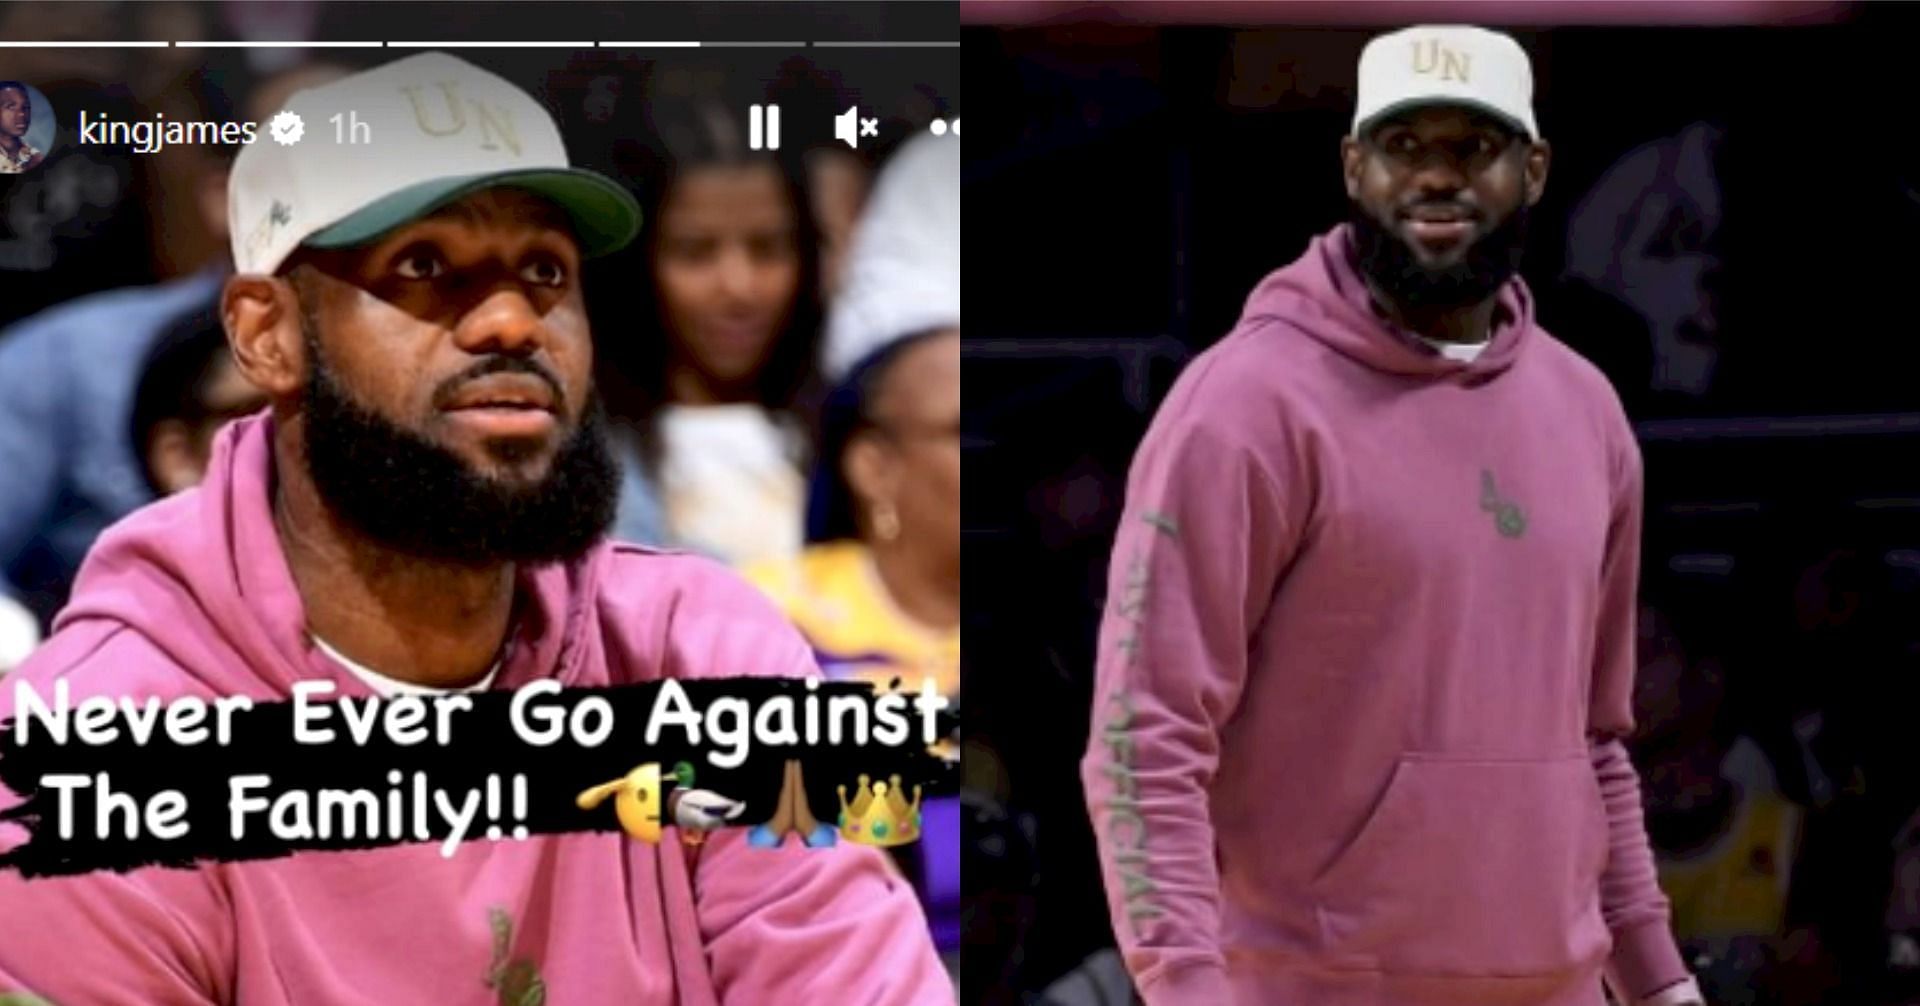  LeBron James posts a cryptic message on IG while showcasing the latest outfit from his friend&rsquo;s clothing brand